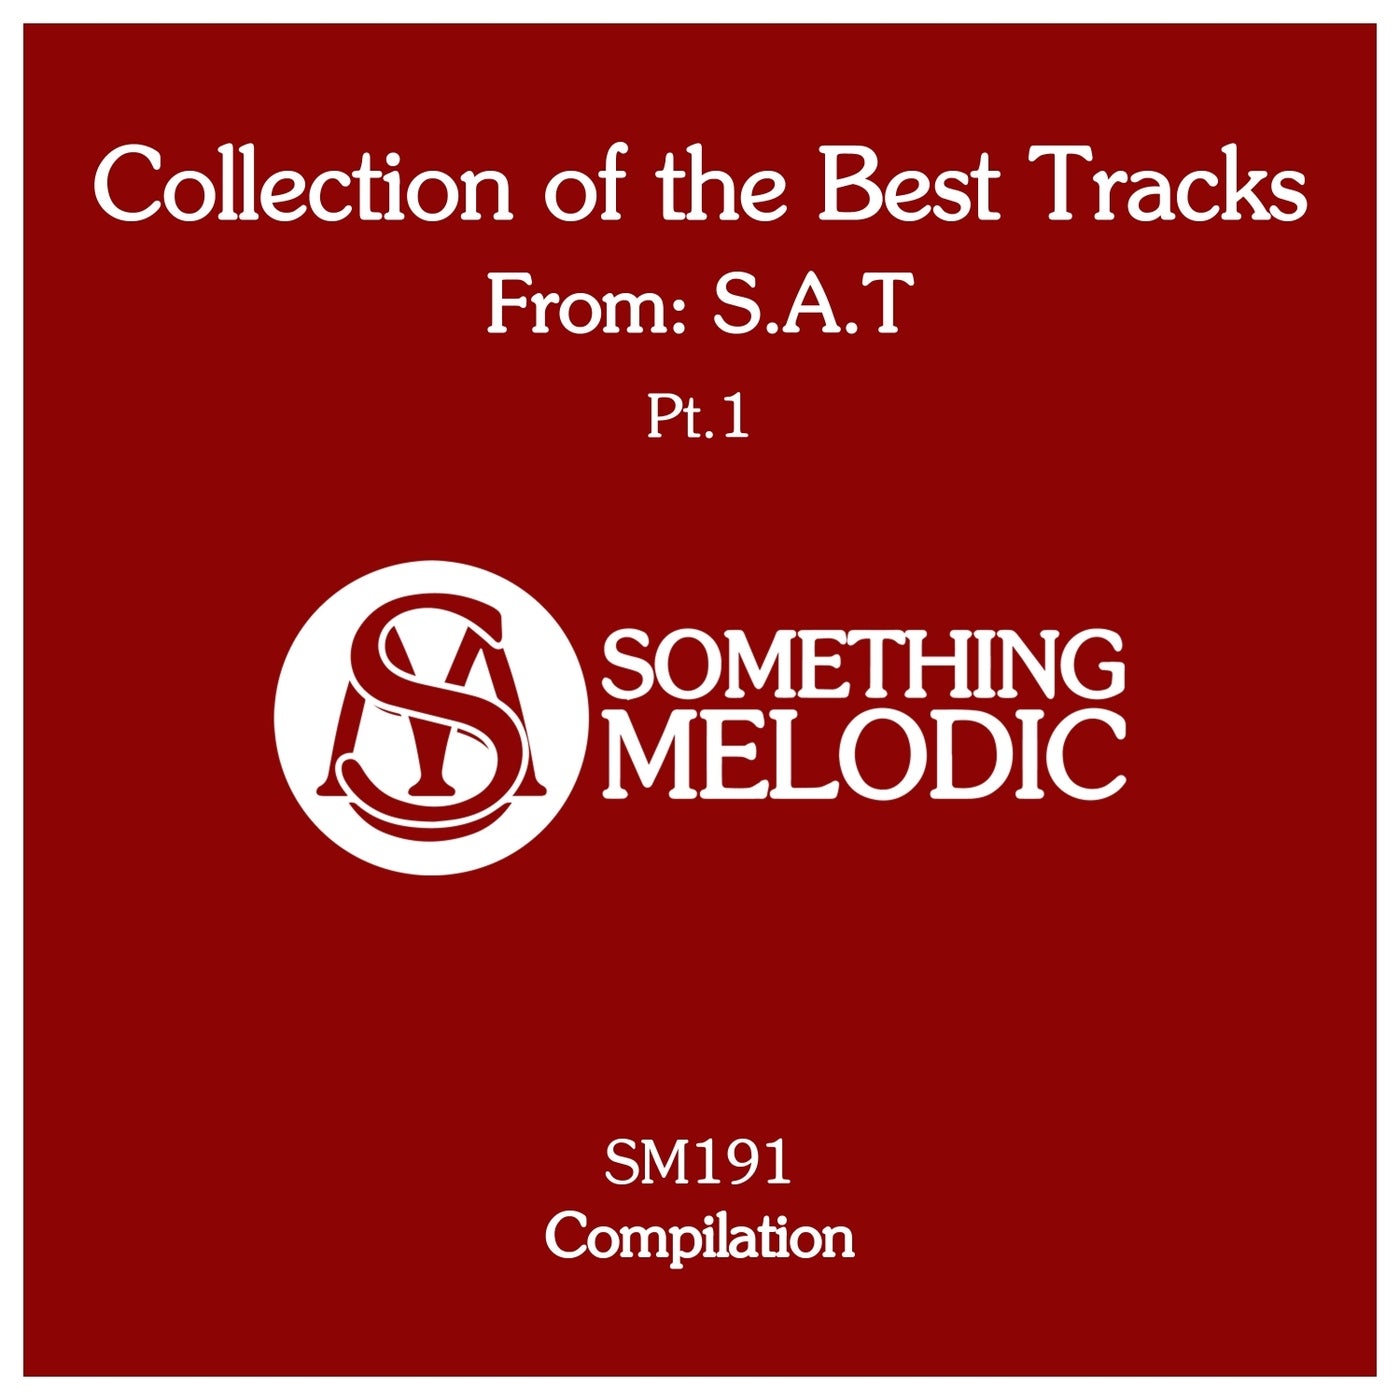 Collection of the Best Tracks From: S.a.t, Pt. 1